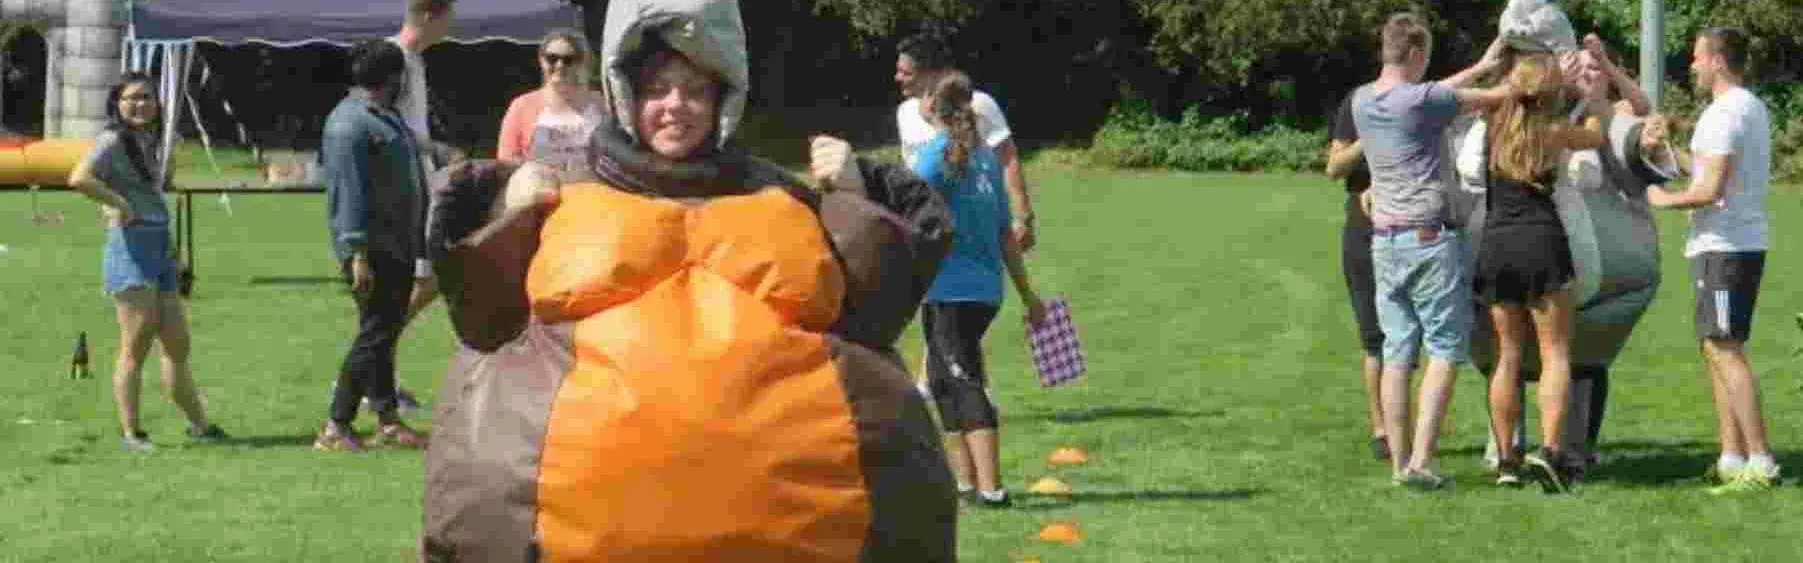 Team member in inflatable sumo costume for Olympic-inspired team building sports day